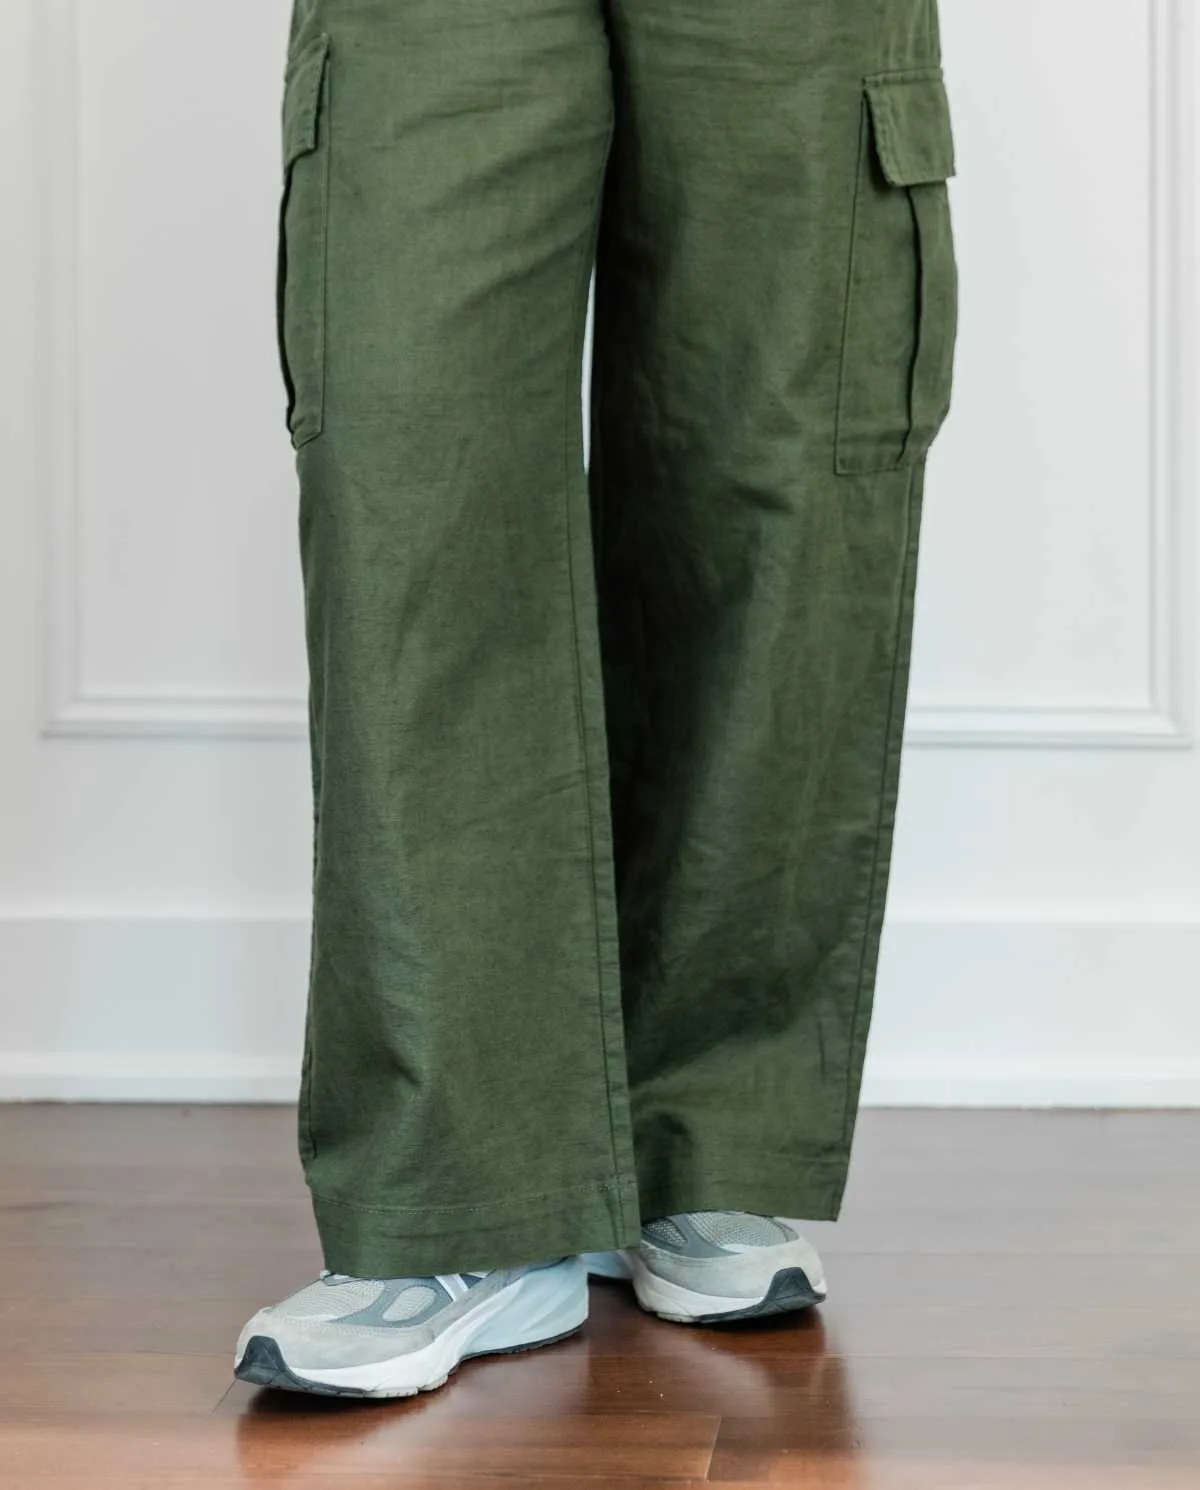 Cropped view of woman's legs wearing grey New Balance dad sneakers with full length wide olive green linen pants.